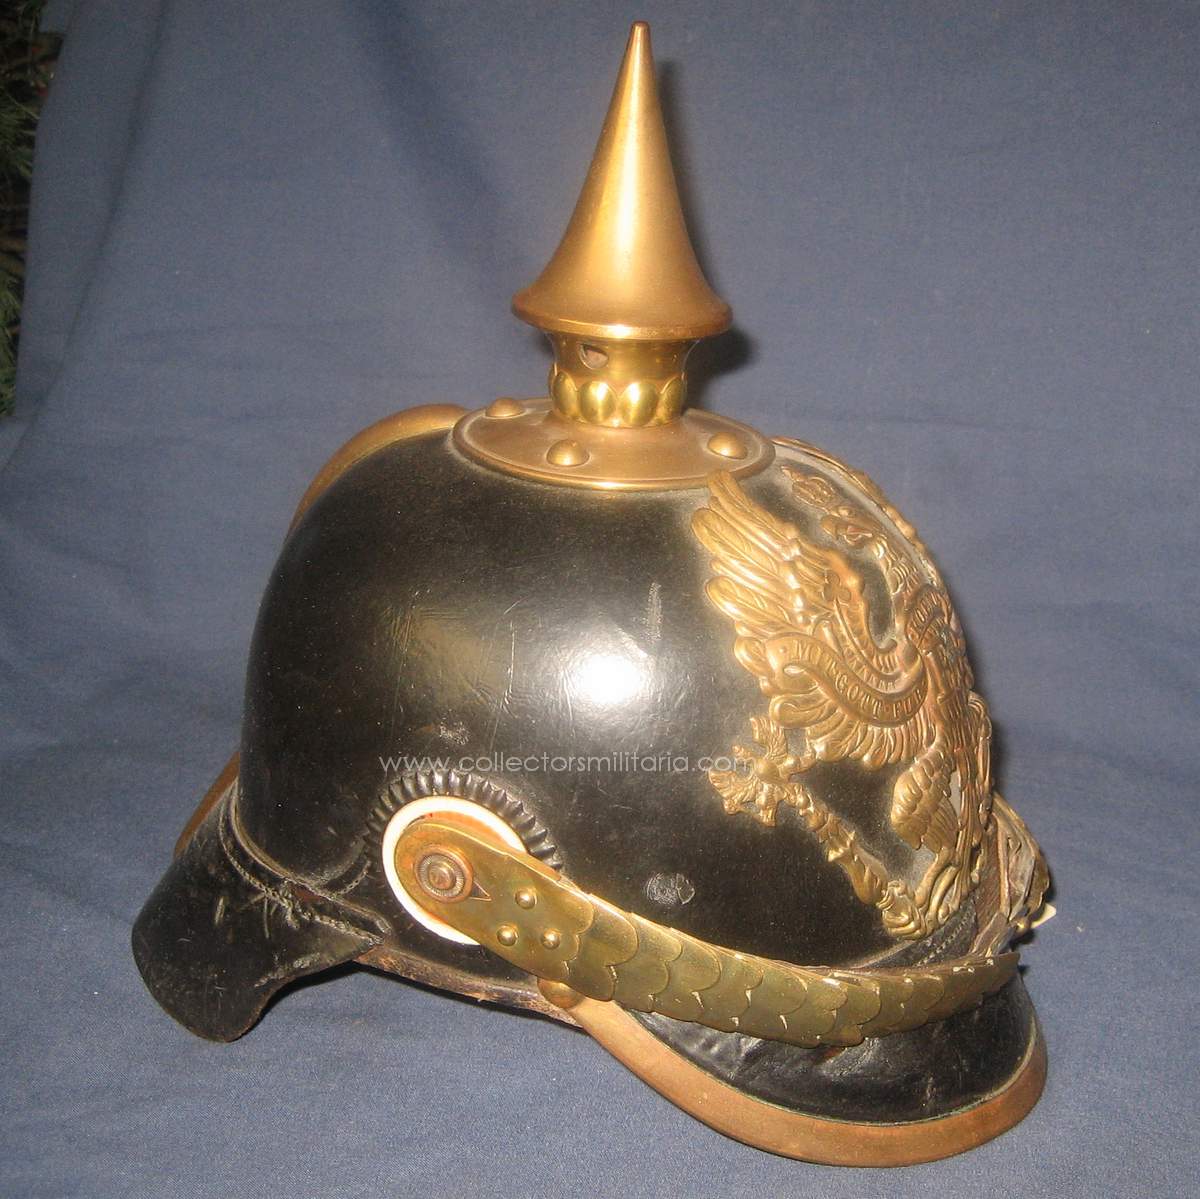 A 1886 Prussian officers spiked helmet.